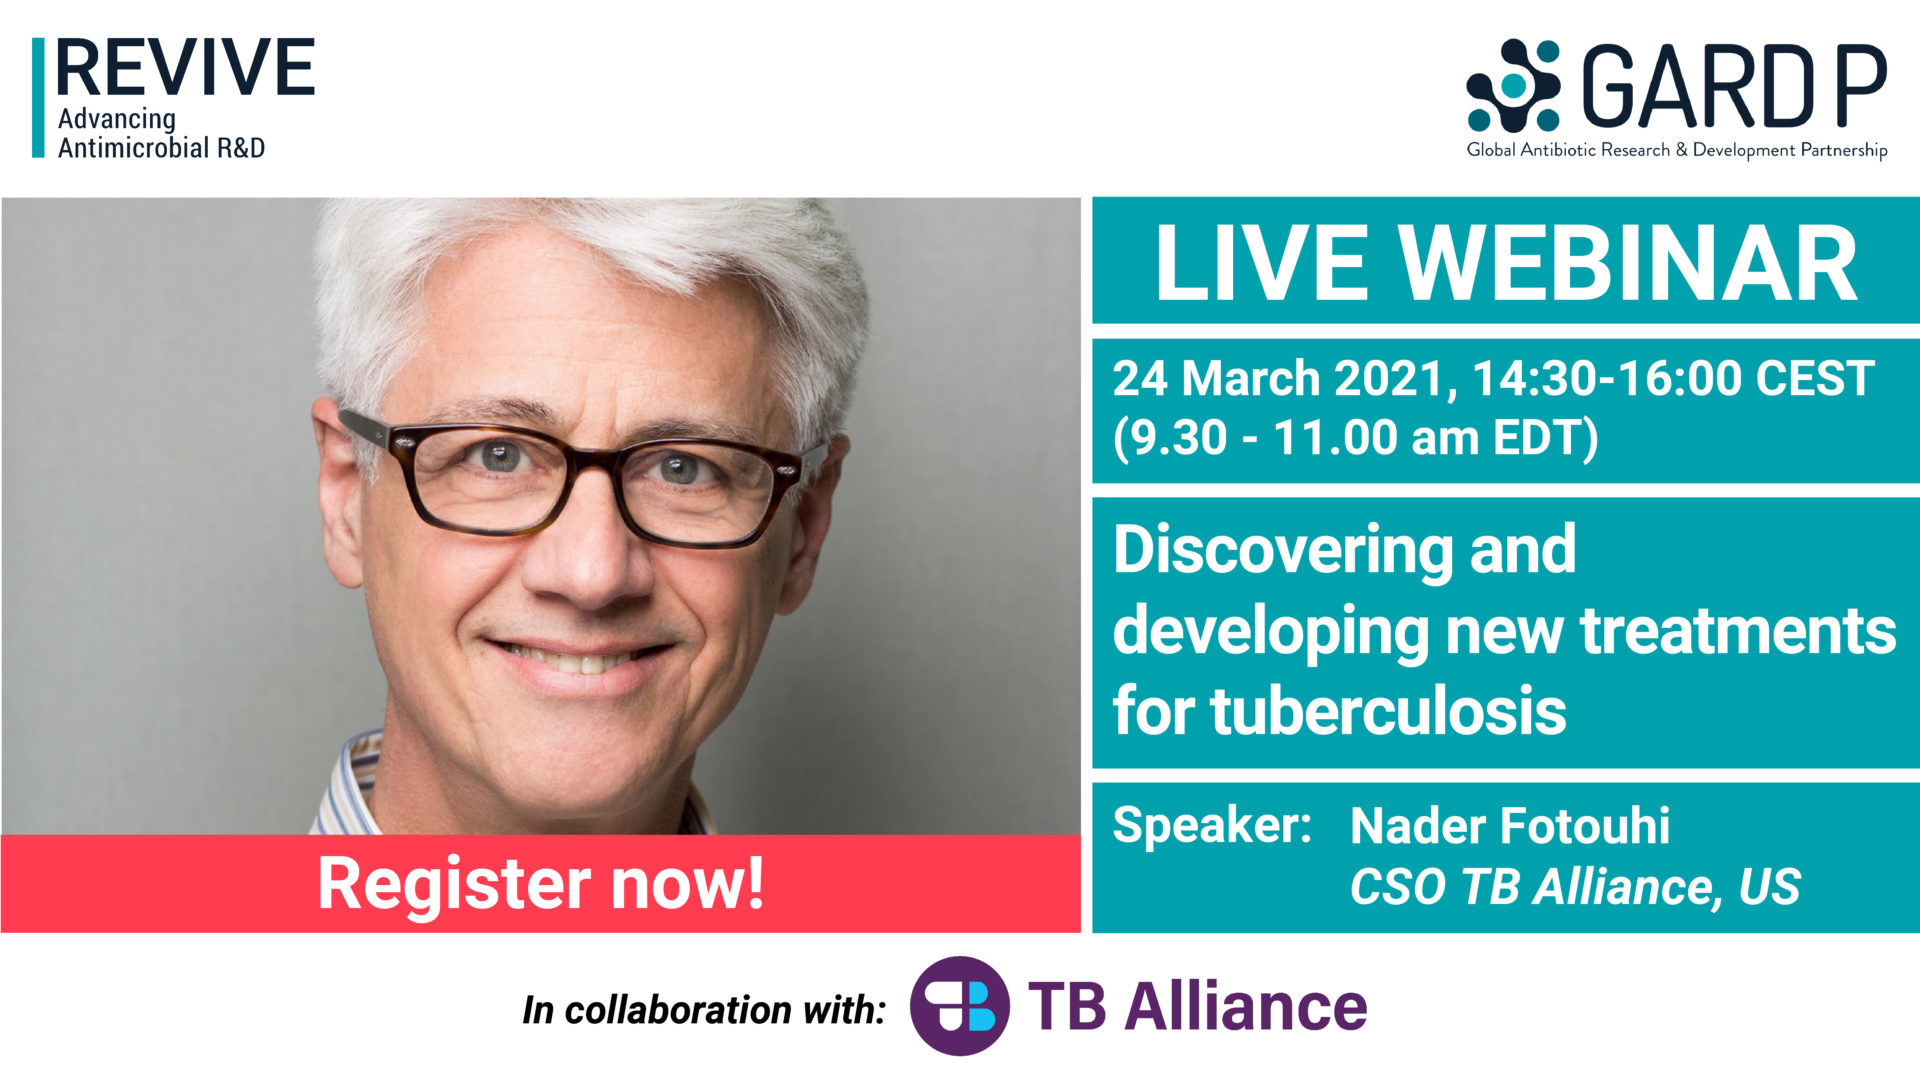 GARD P Webinar Discovering and developing new treatments for tuberculosis